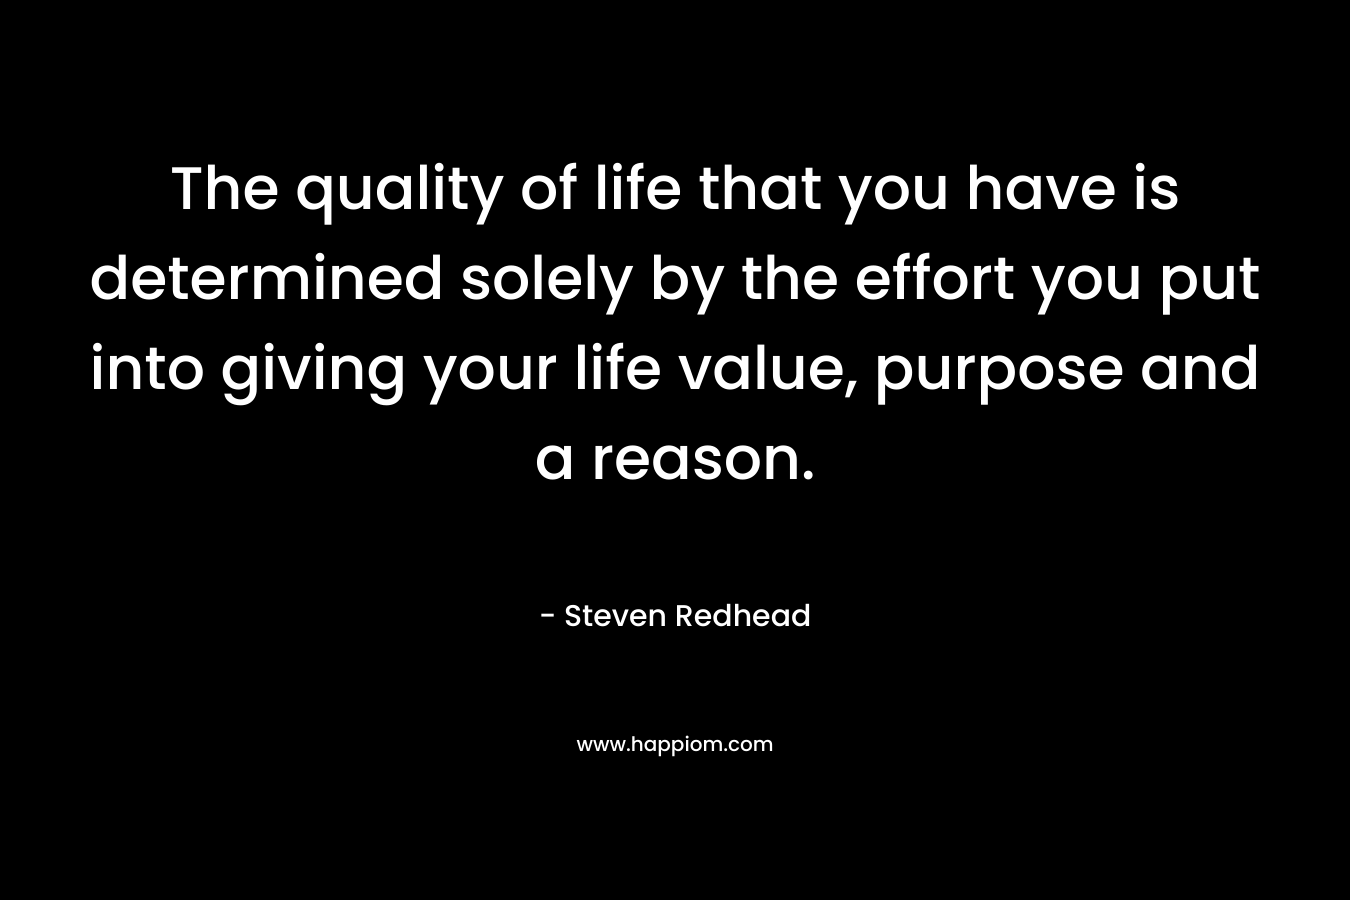 The quality of life that you have is determined solely by the effort you put into giving your life value, purpose and a reason.